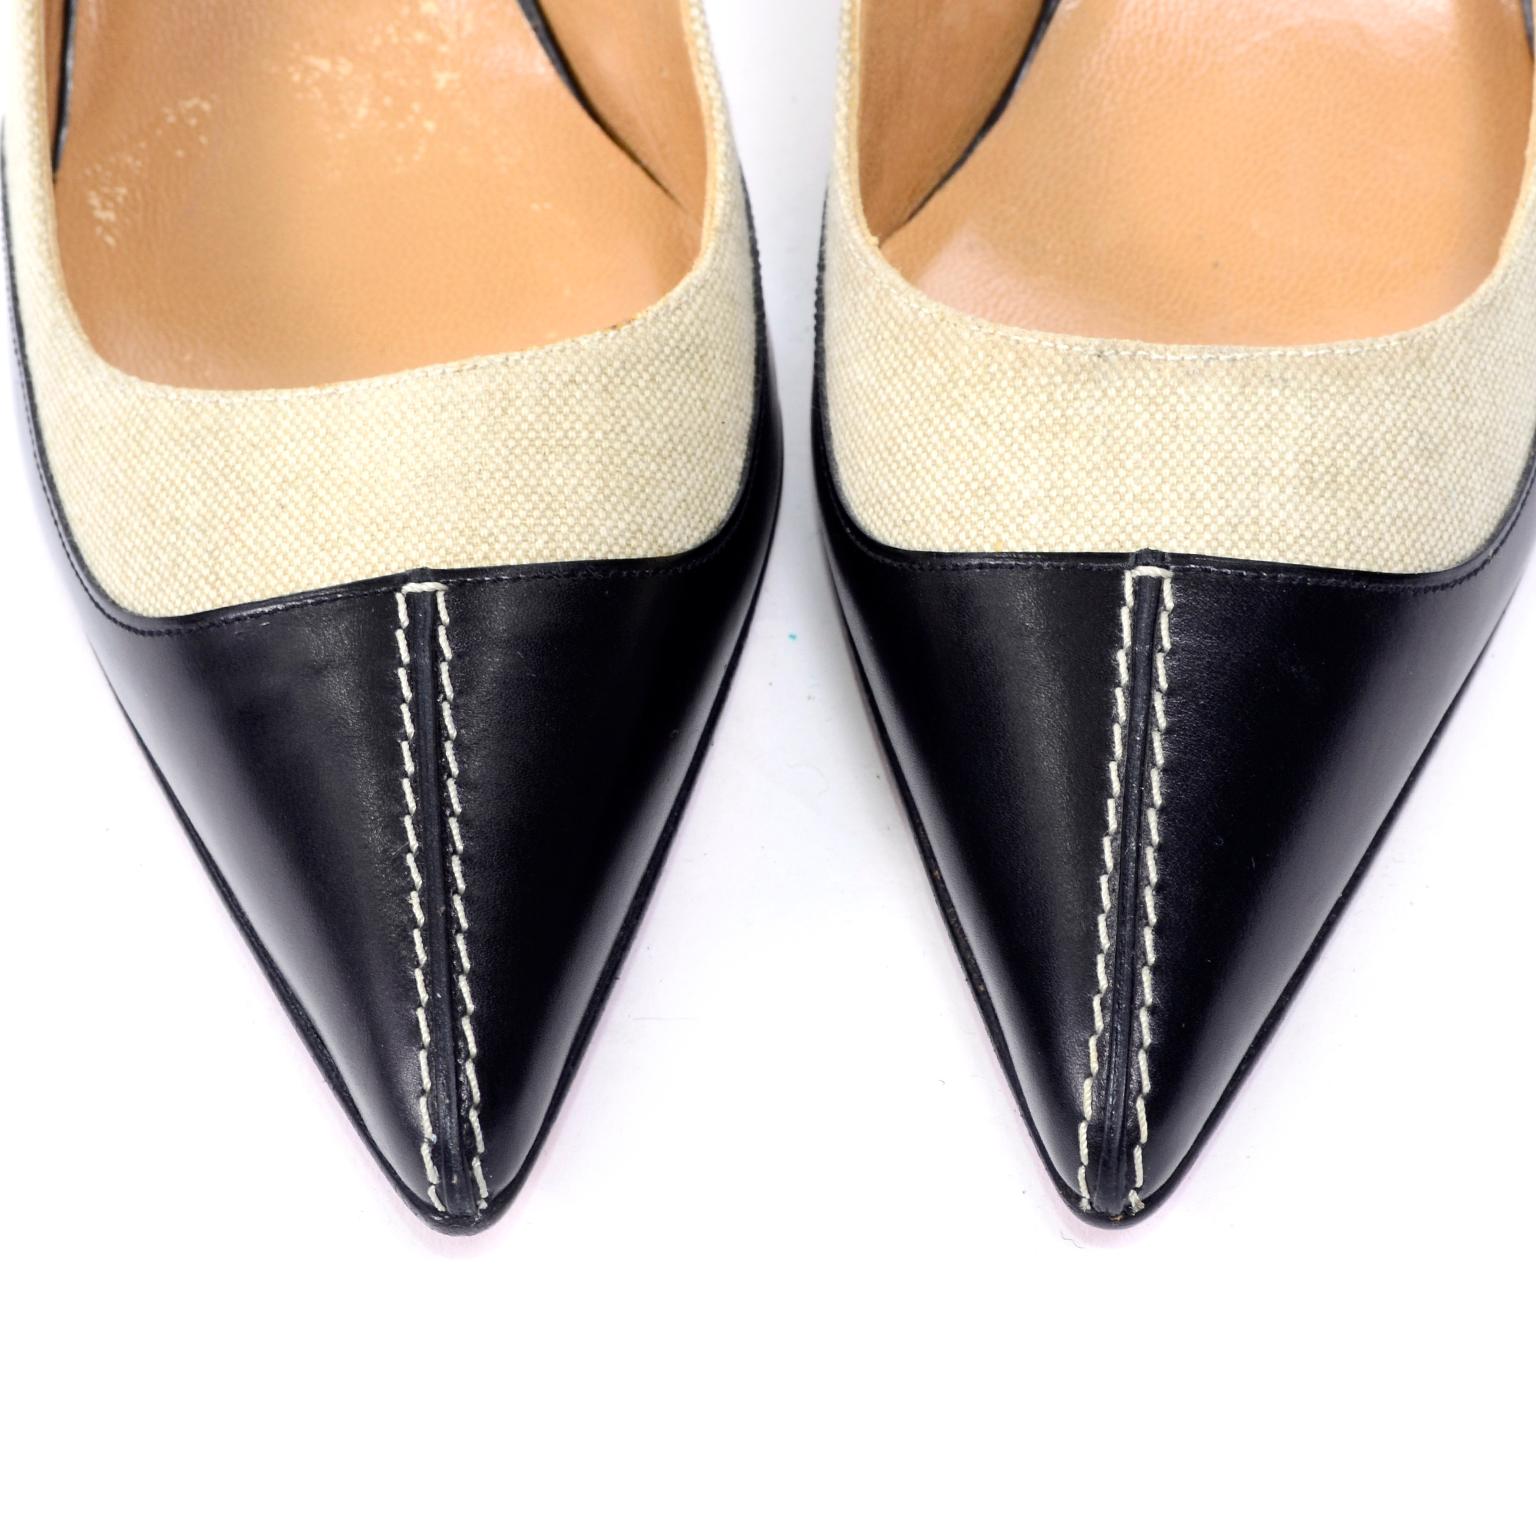 Christian Louboutin Shoes Slingback Heels in Two Tone Black and Natural ...